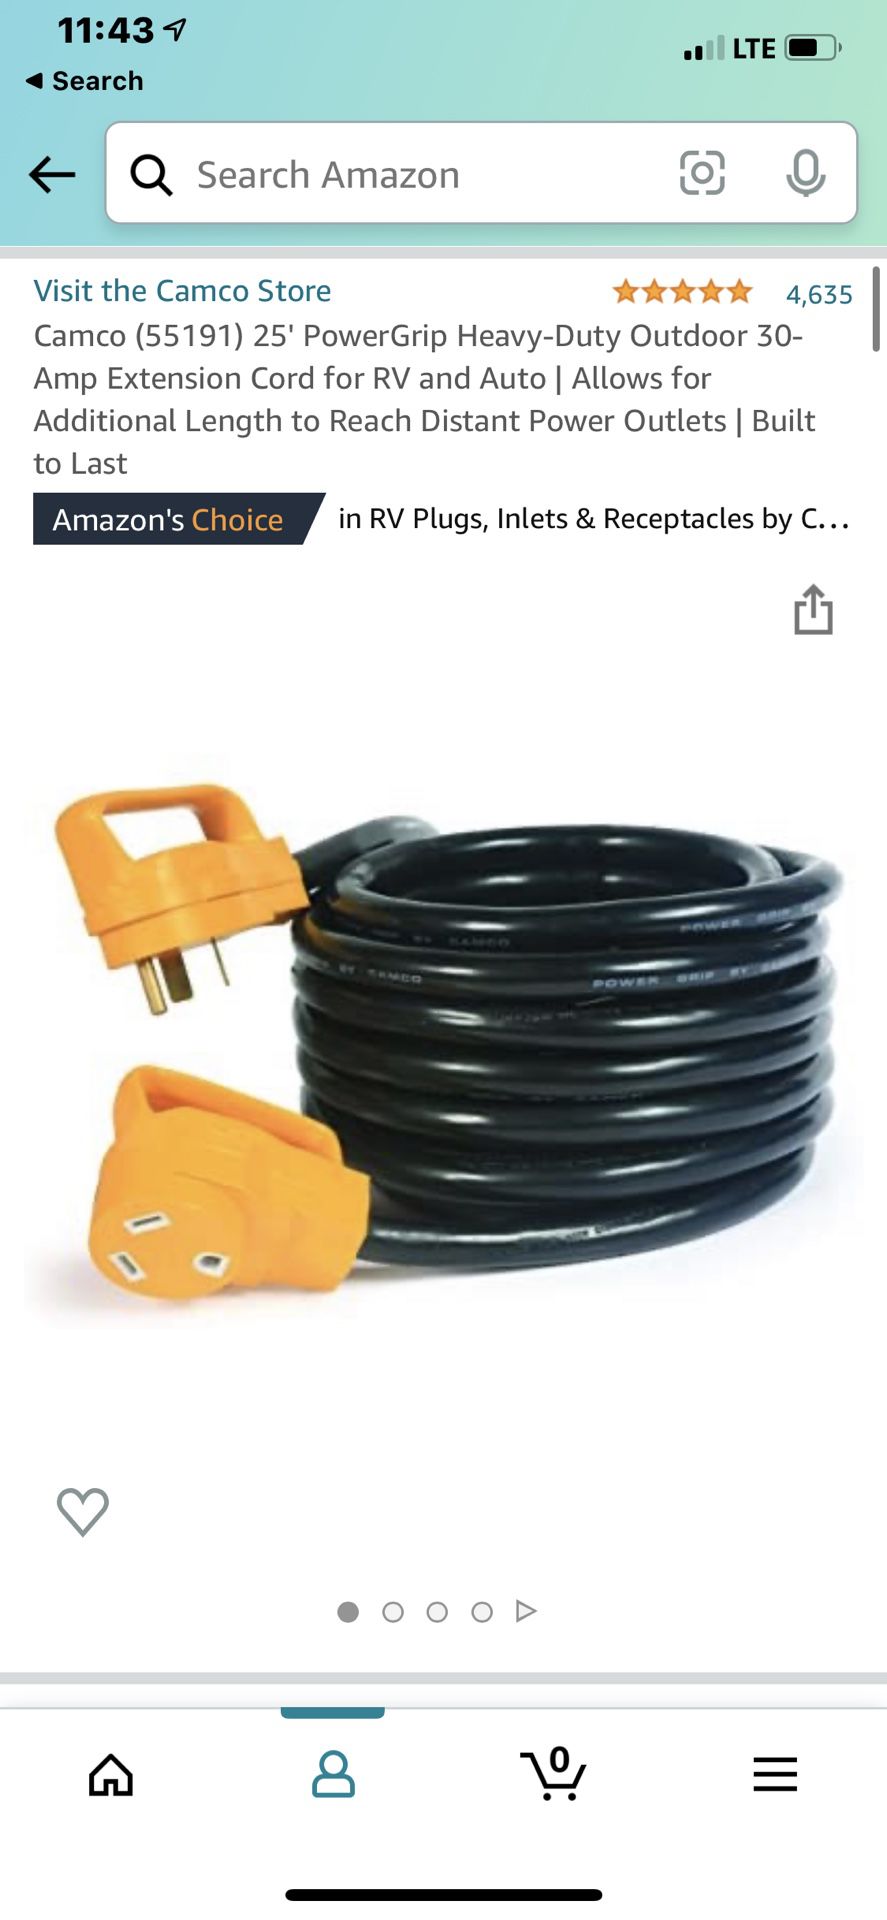 Photo Camco 55191 25 PowerGrip HeavyDuty Outdoor 30Amp Extension Cord for RV and Auto